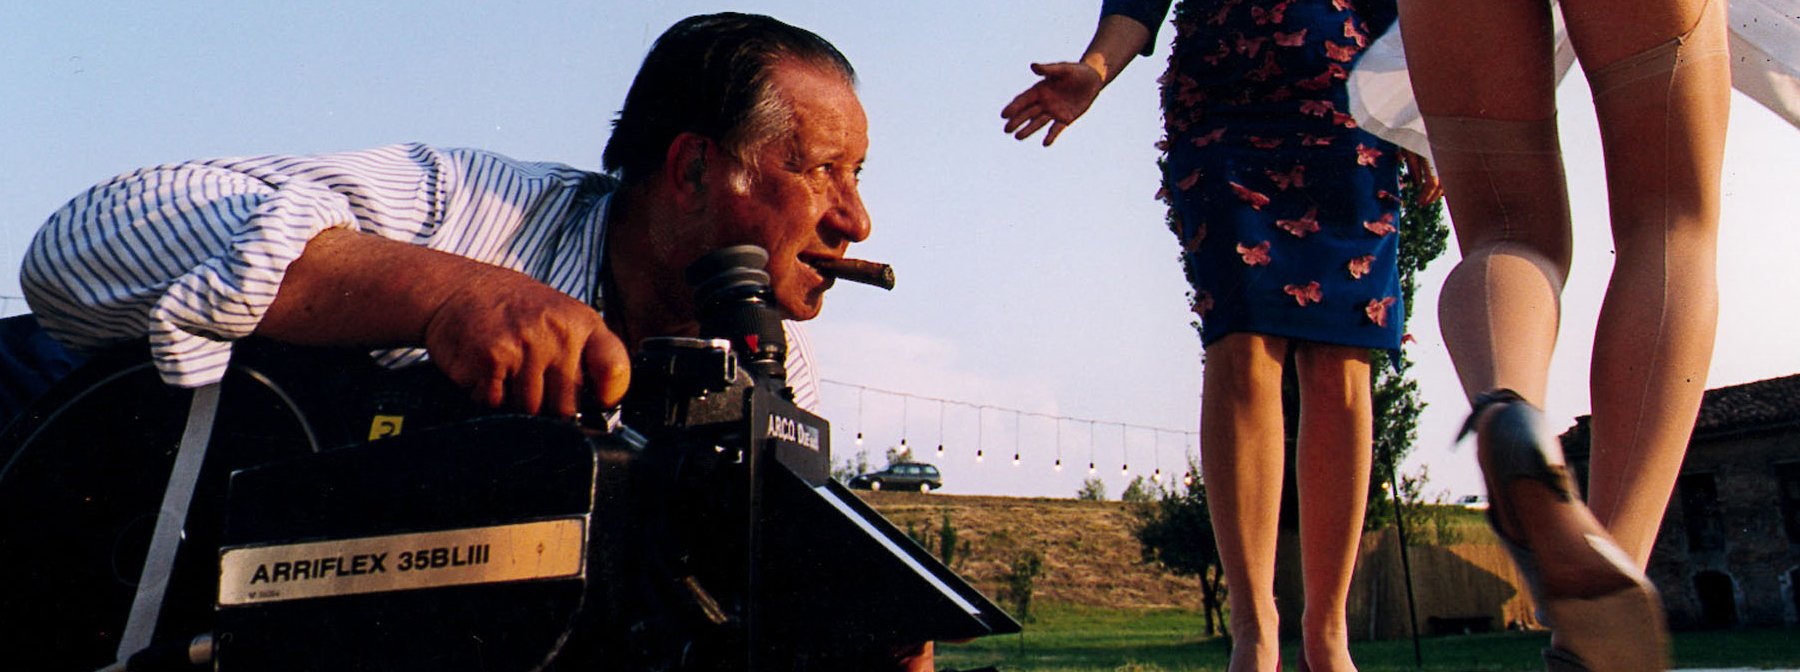 Director Tinto Brass with camera